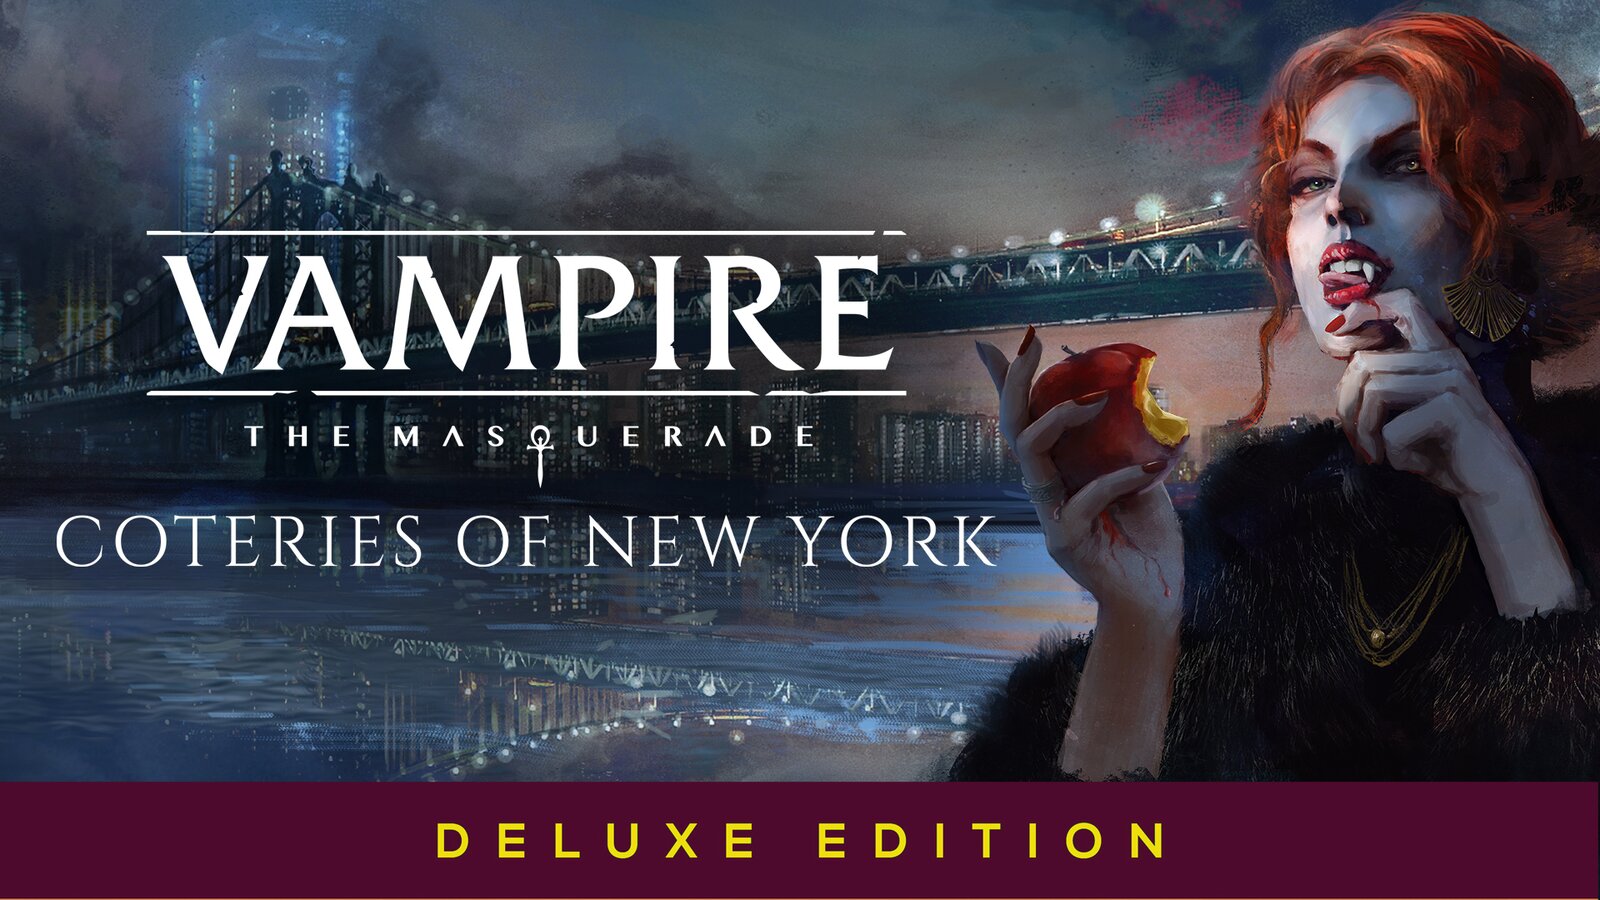 Vampire: The Masquerade - Coteries of New York - Deluxe Edition